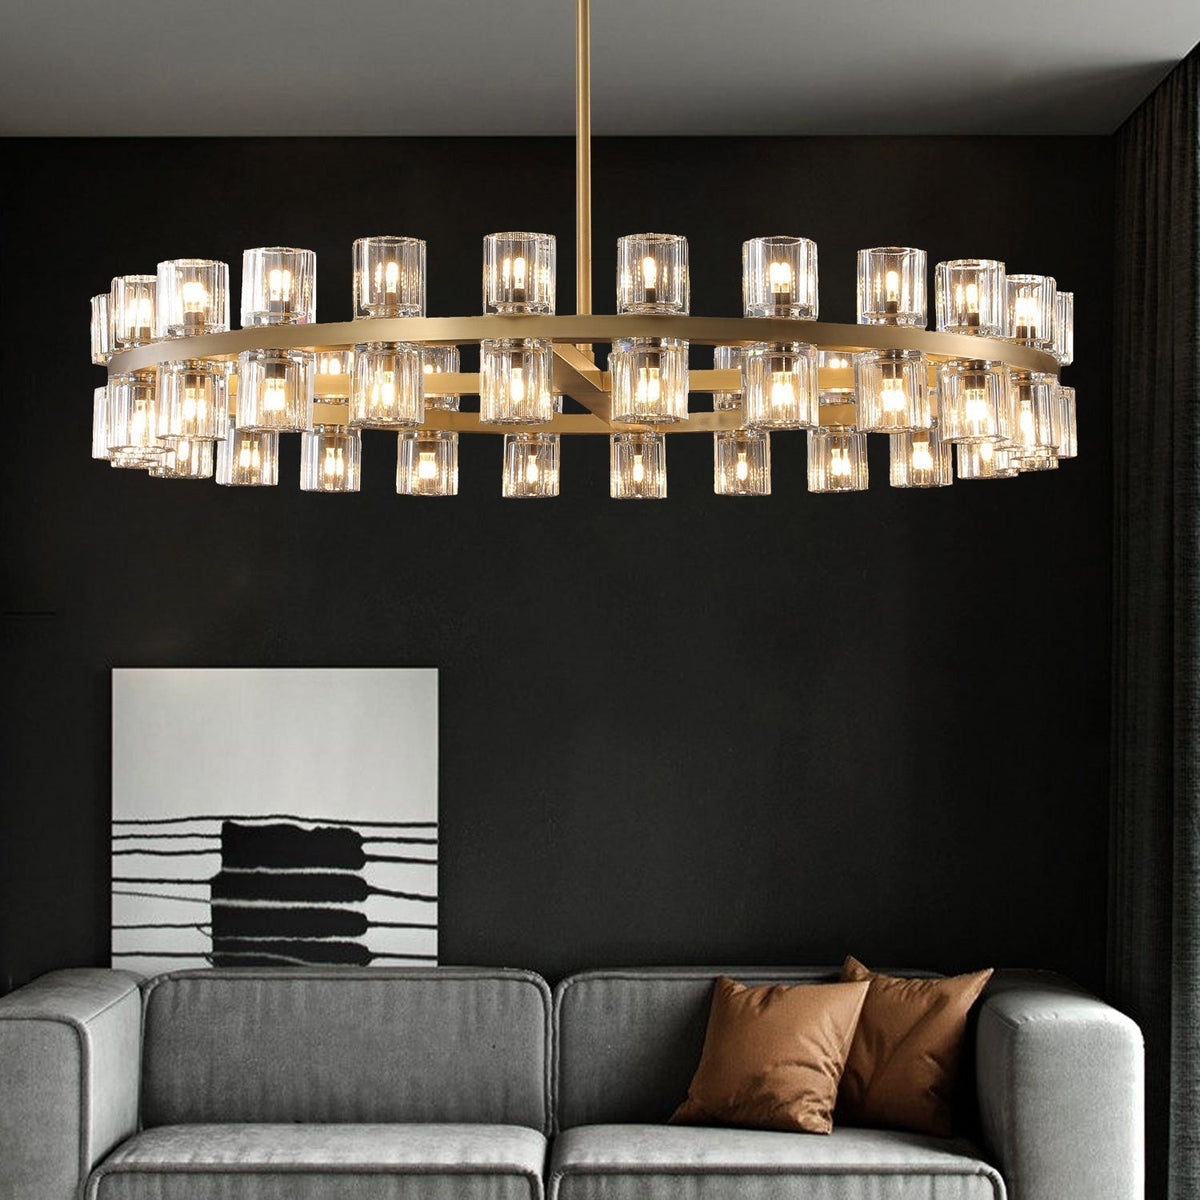 The rhythmic design of this chandelier collection is inspired by the shape and scale of industrial gears, where spokes are interlaced with negative space to interlock with other gears. Here, the spokes are hexagonal in form, juxtaposed with a circular interior, crafted from crystal glass, running along a simple, sturdy metal frame. The light shines through the glass as if it were a candle.